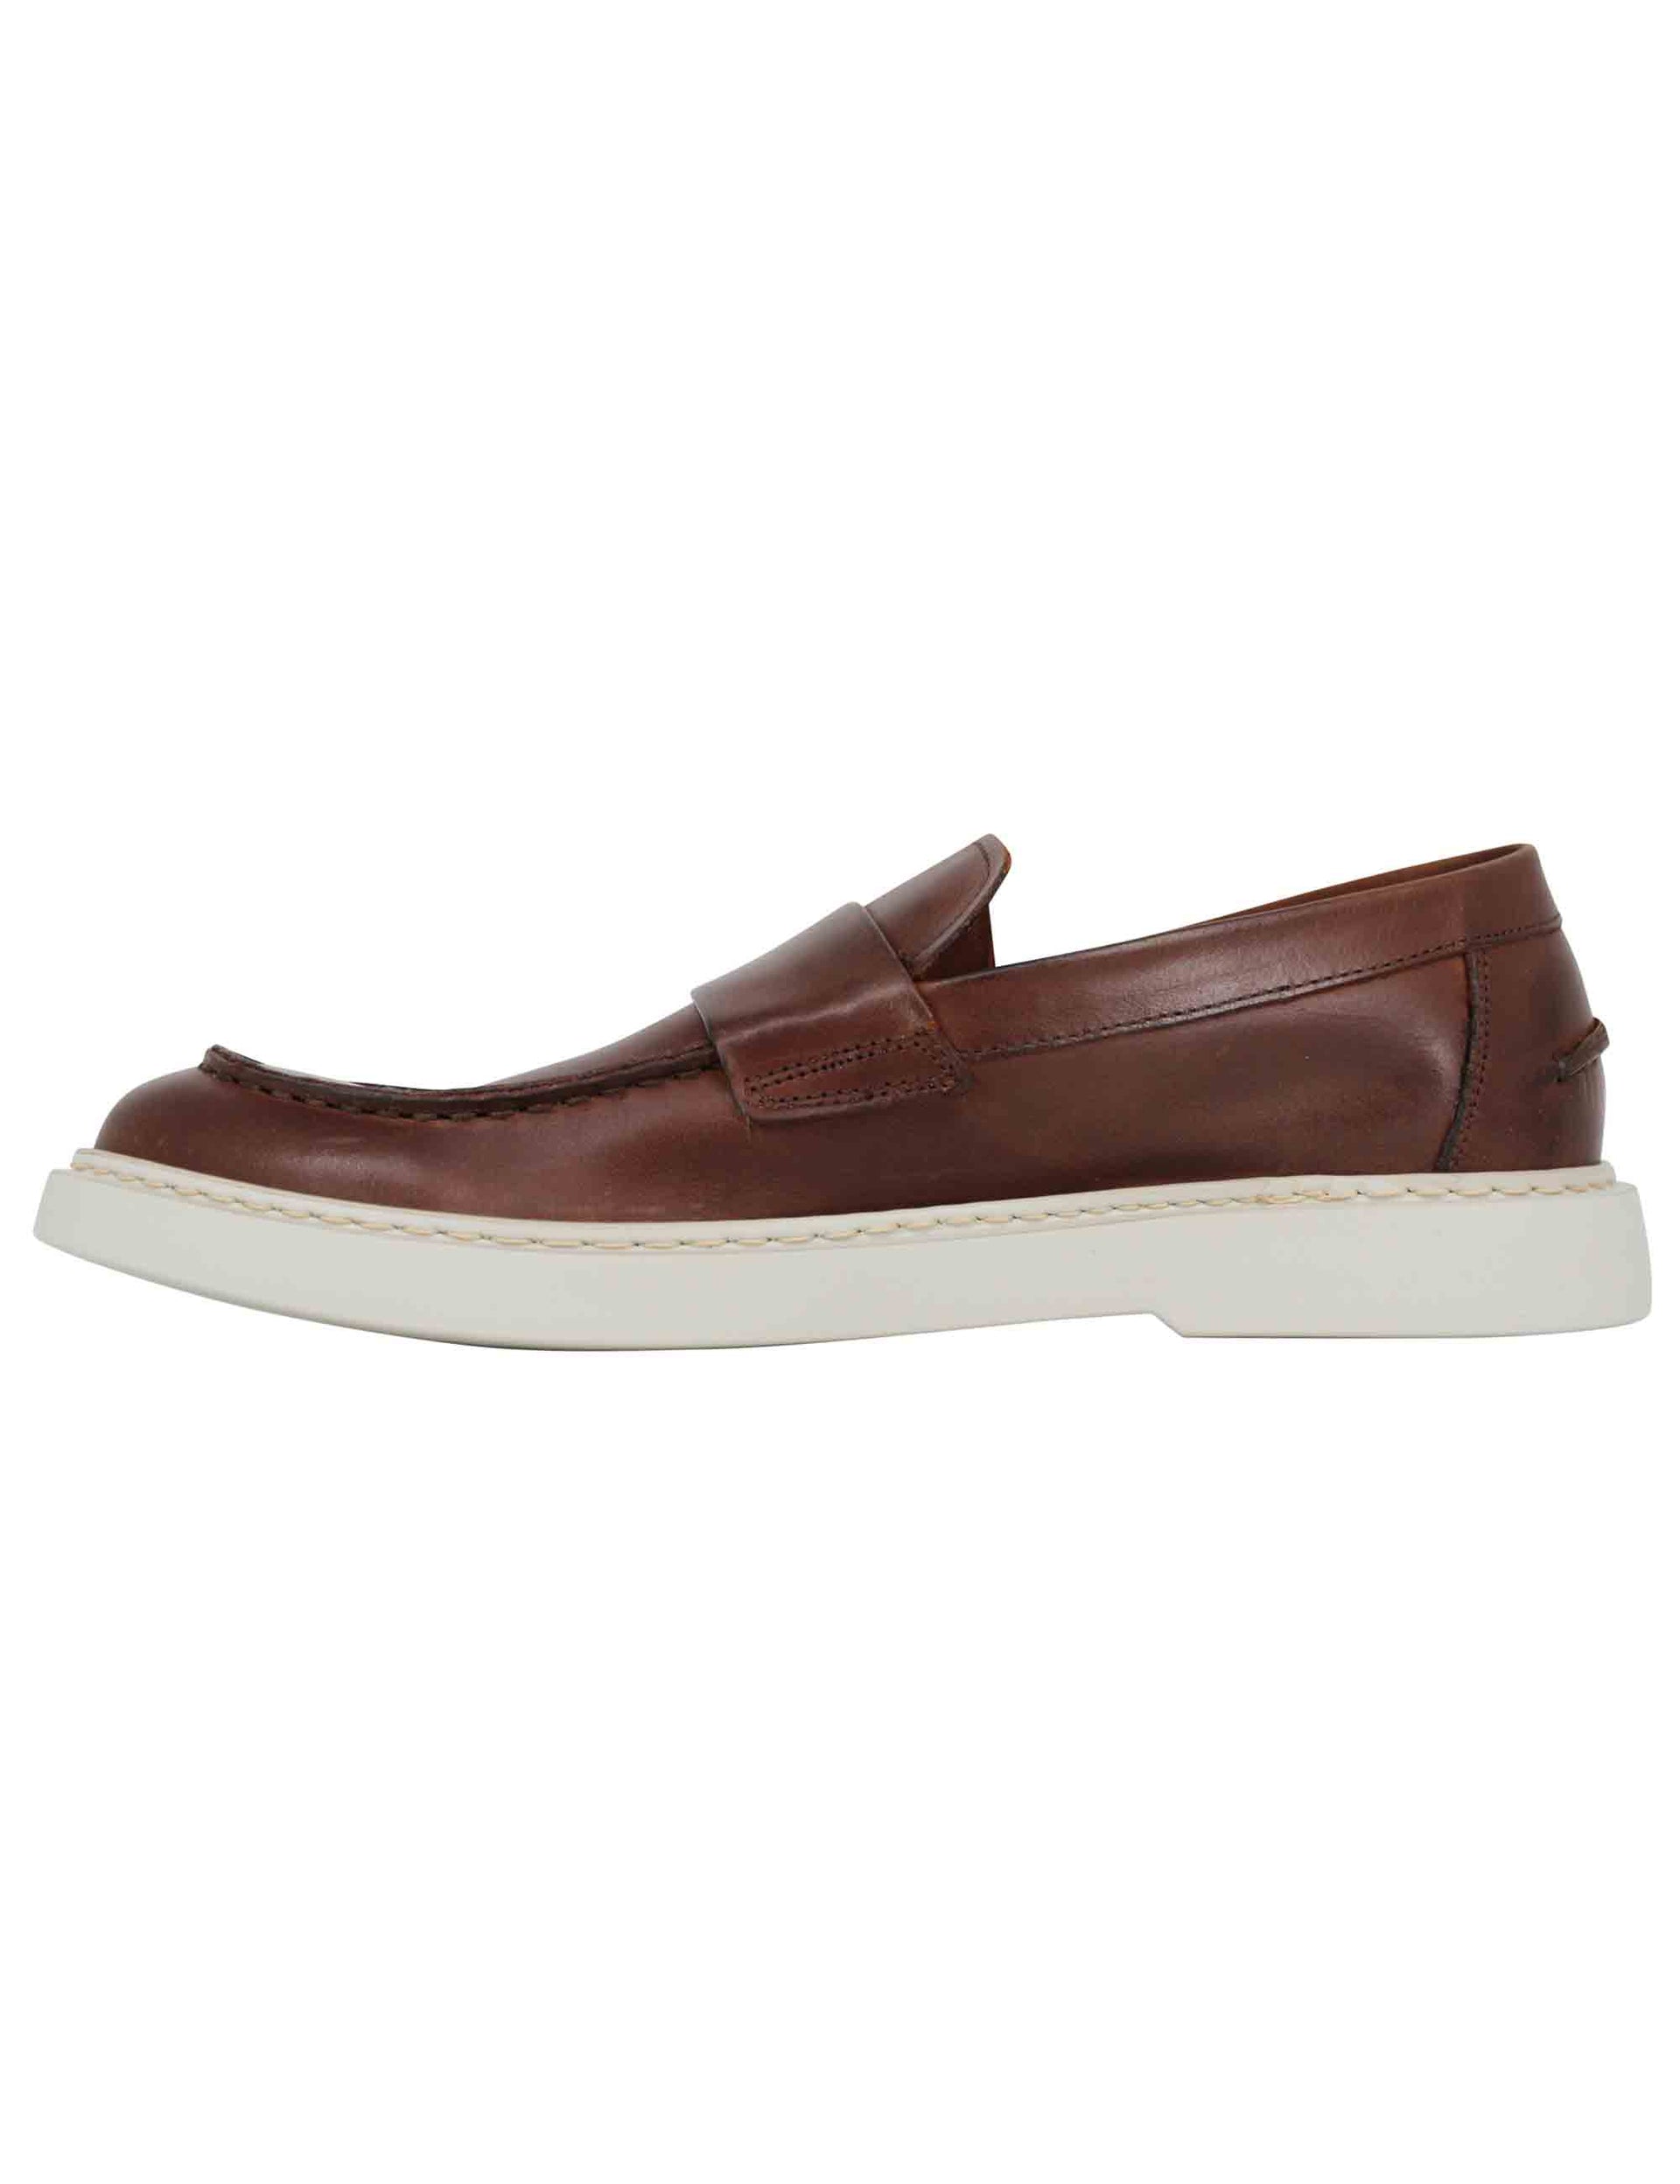 Men's brown leather loafers with white rubber sole